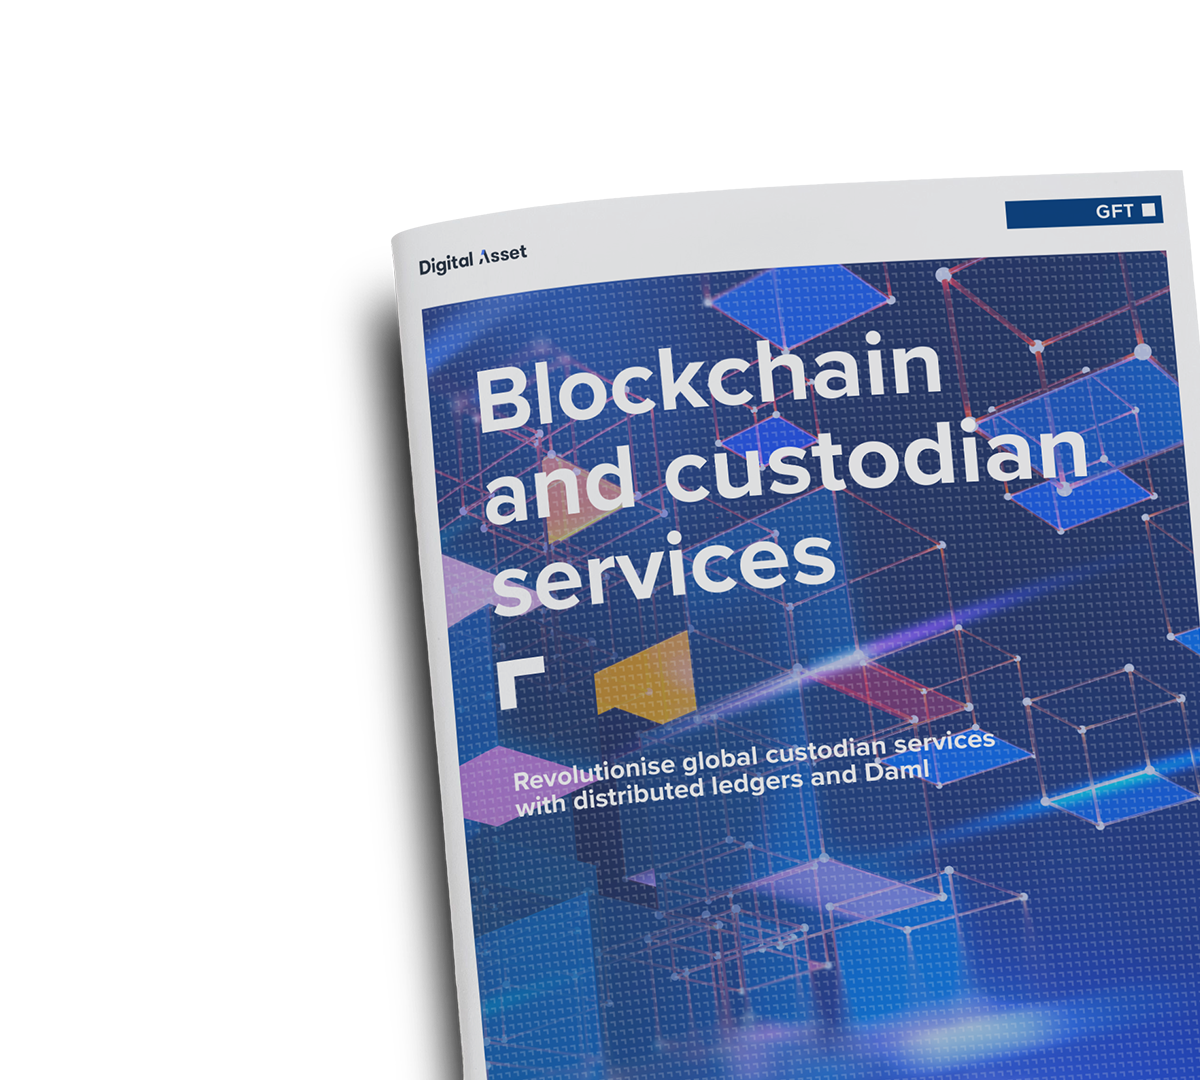 Learn how distributed ledger technology and Daml smart contracts will revolutionise global custody services.